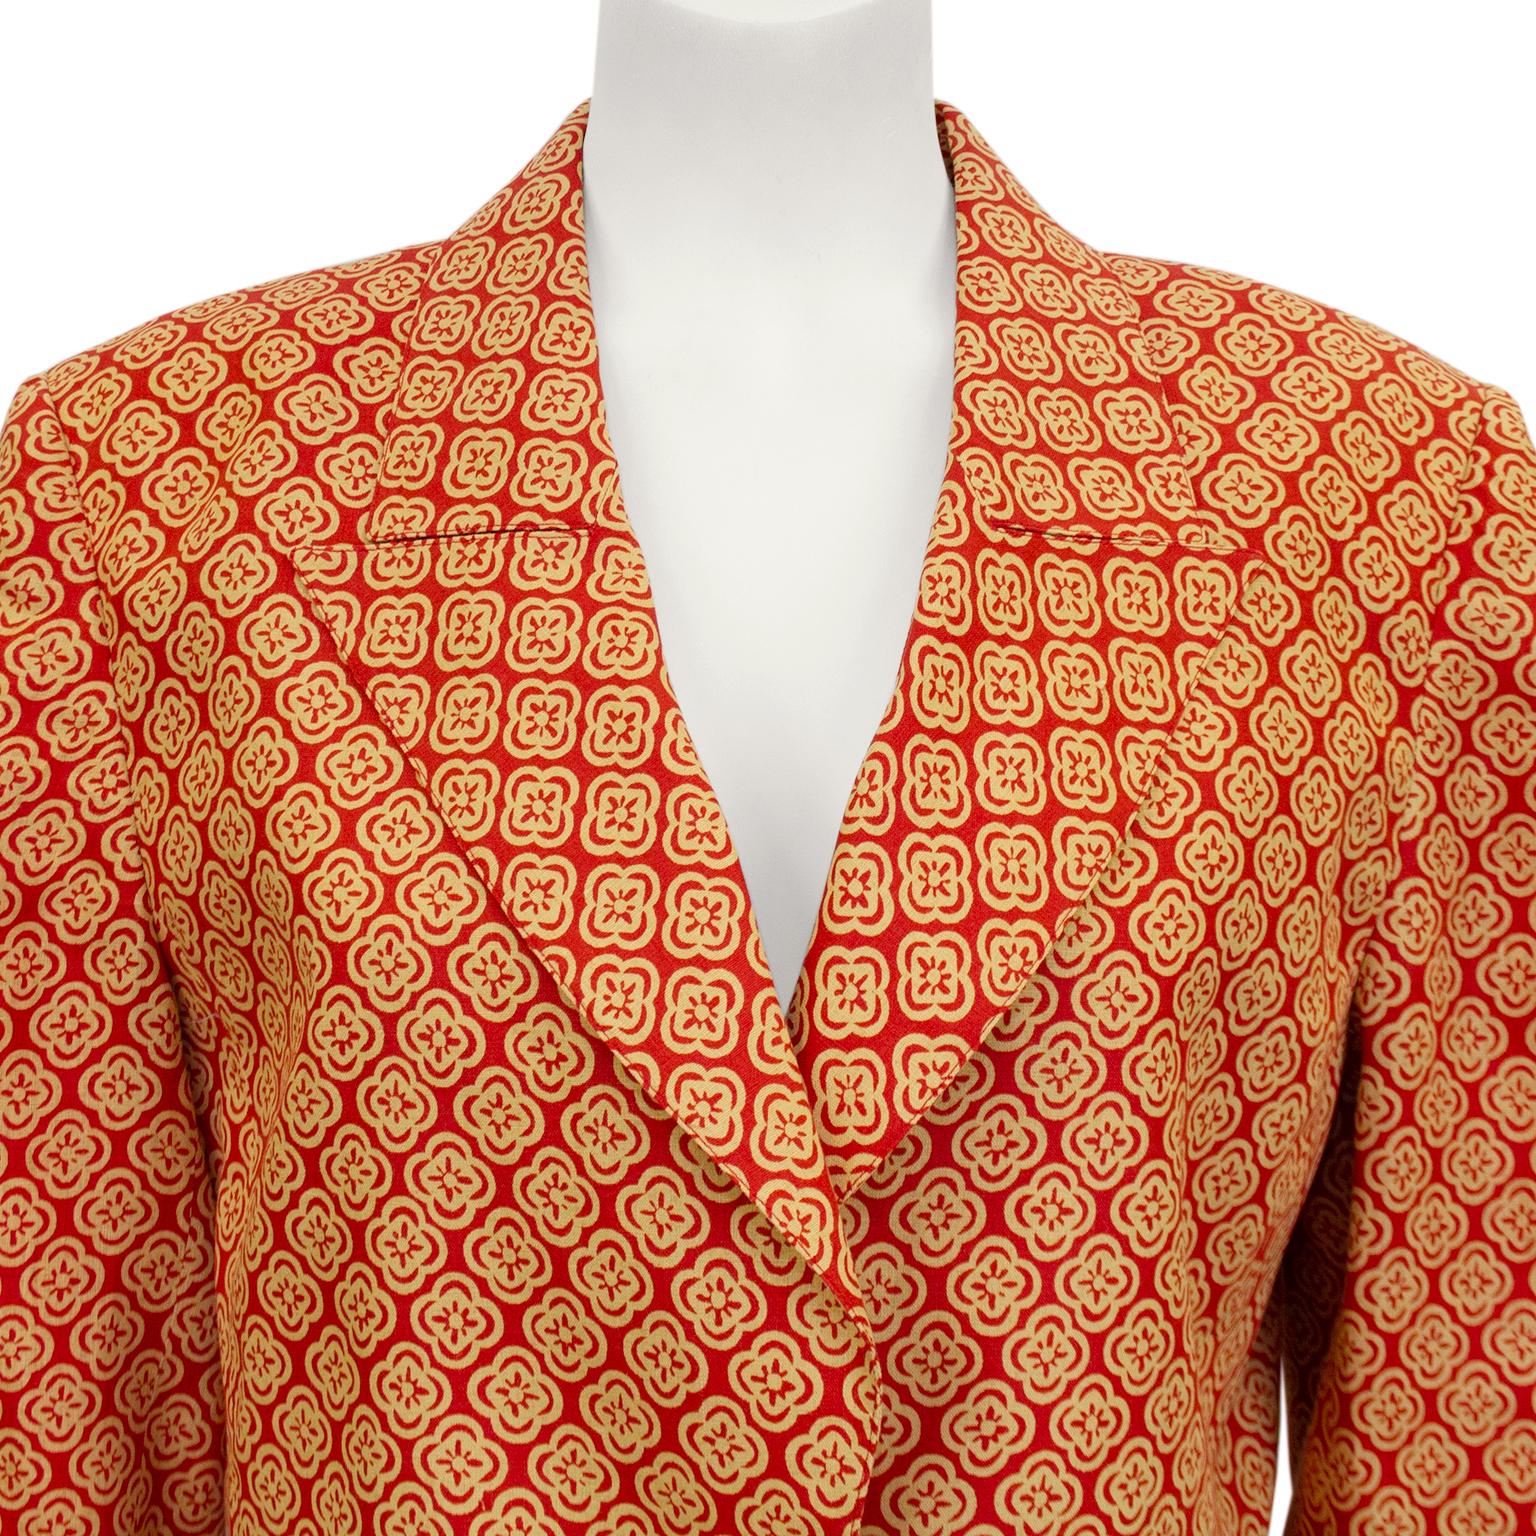 Women's 1980s Valentino Orange and Beige Floral Printed 3 Piece Skirt Suit For Sale